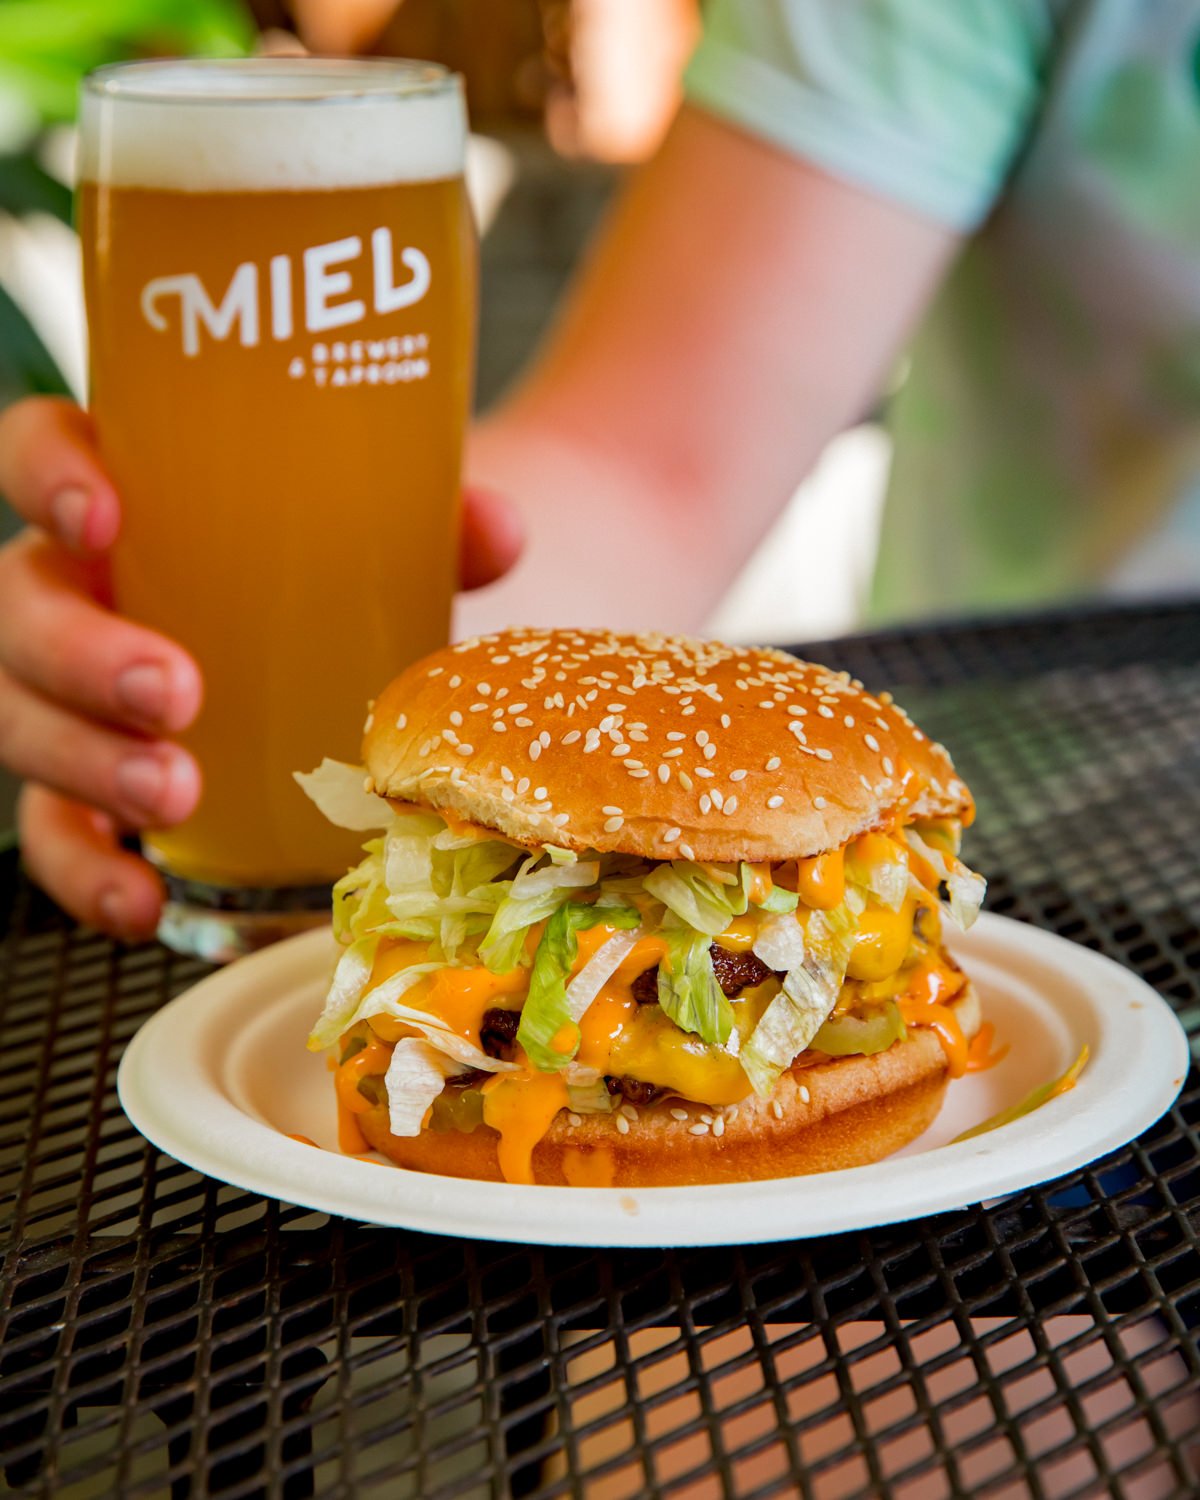 A cheeseburger and a glass of Miel beer